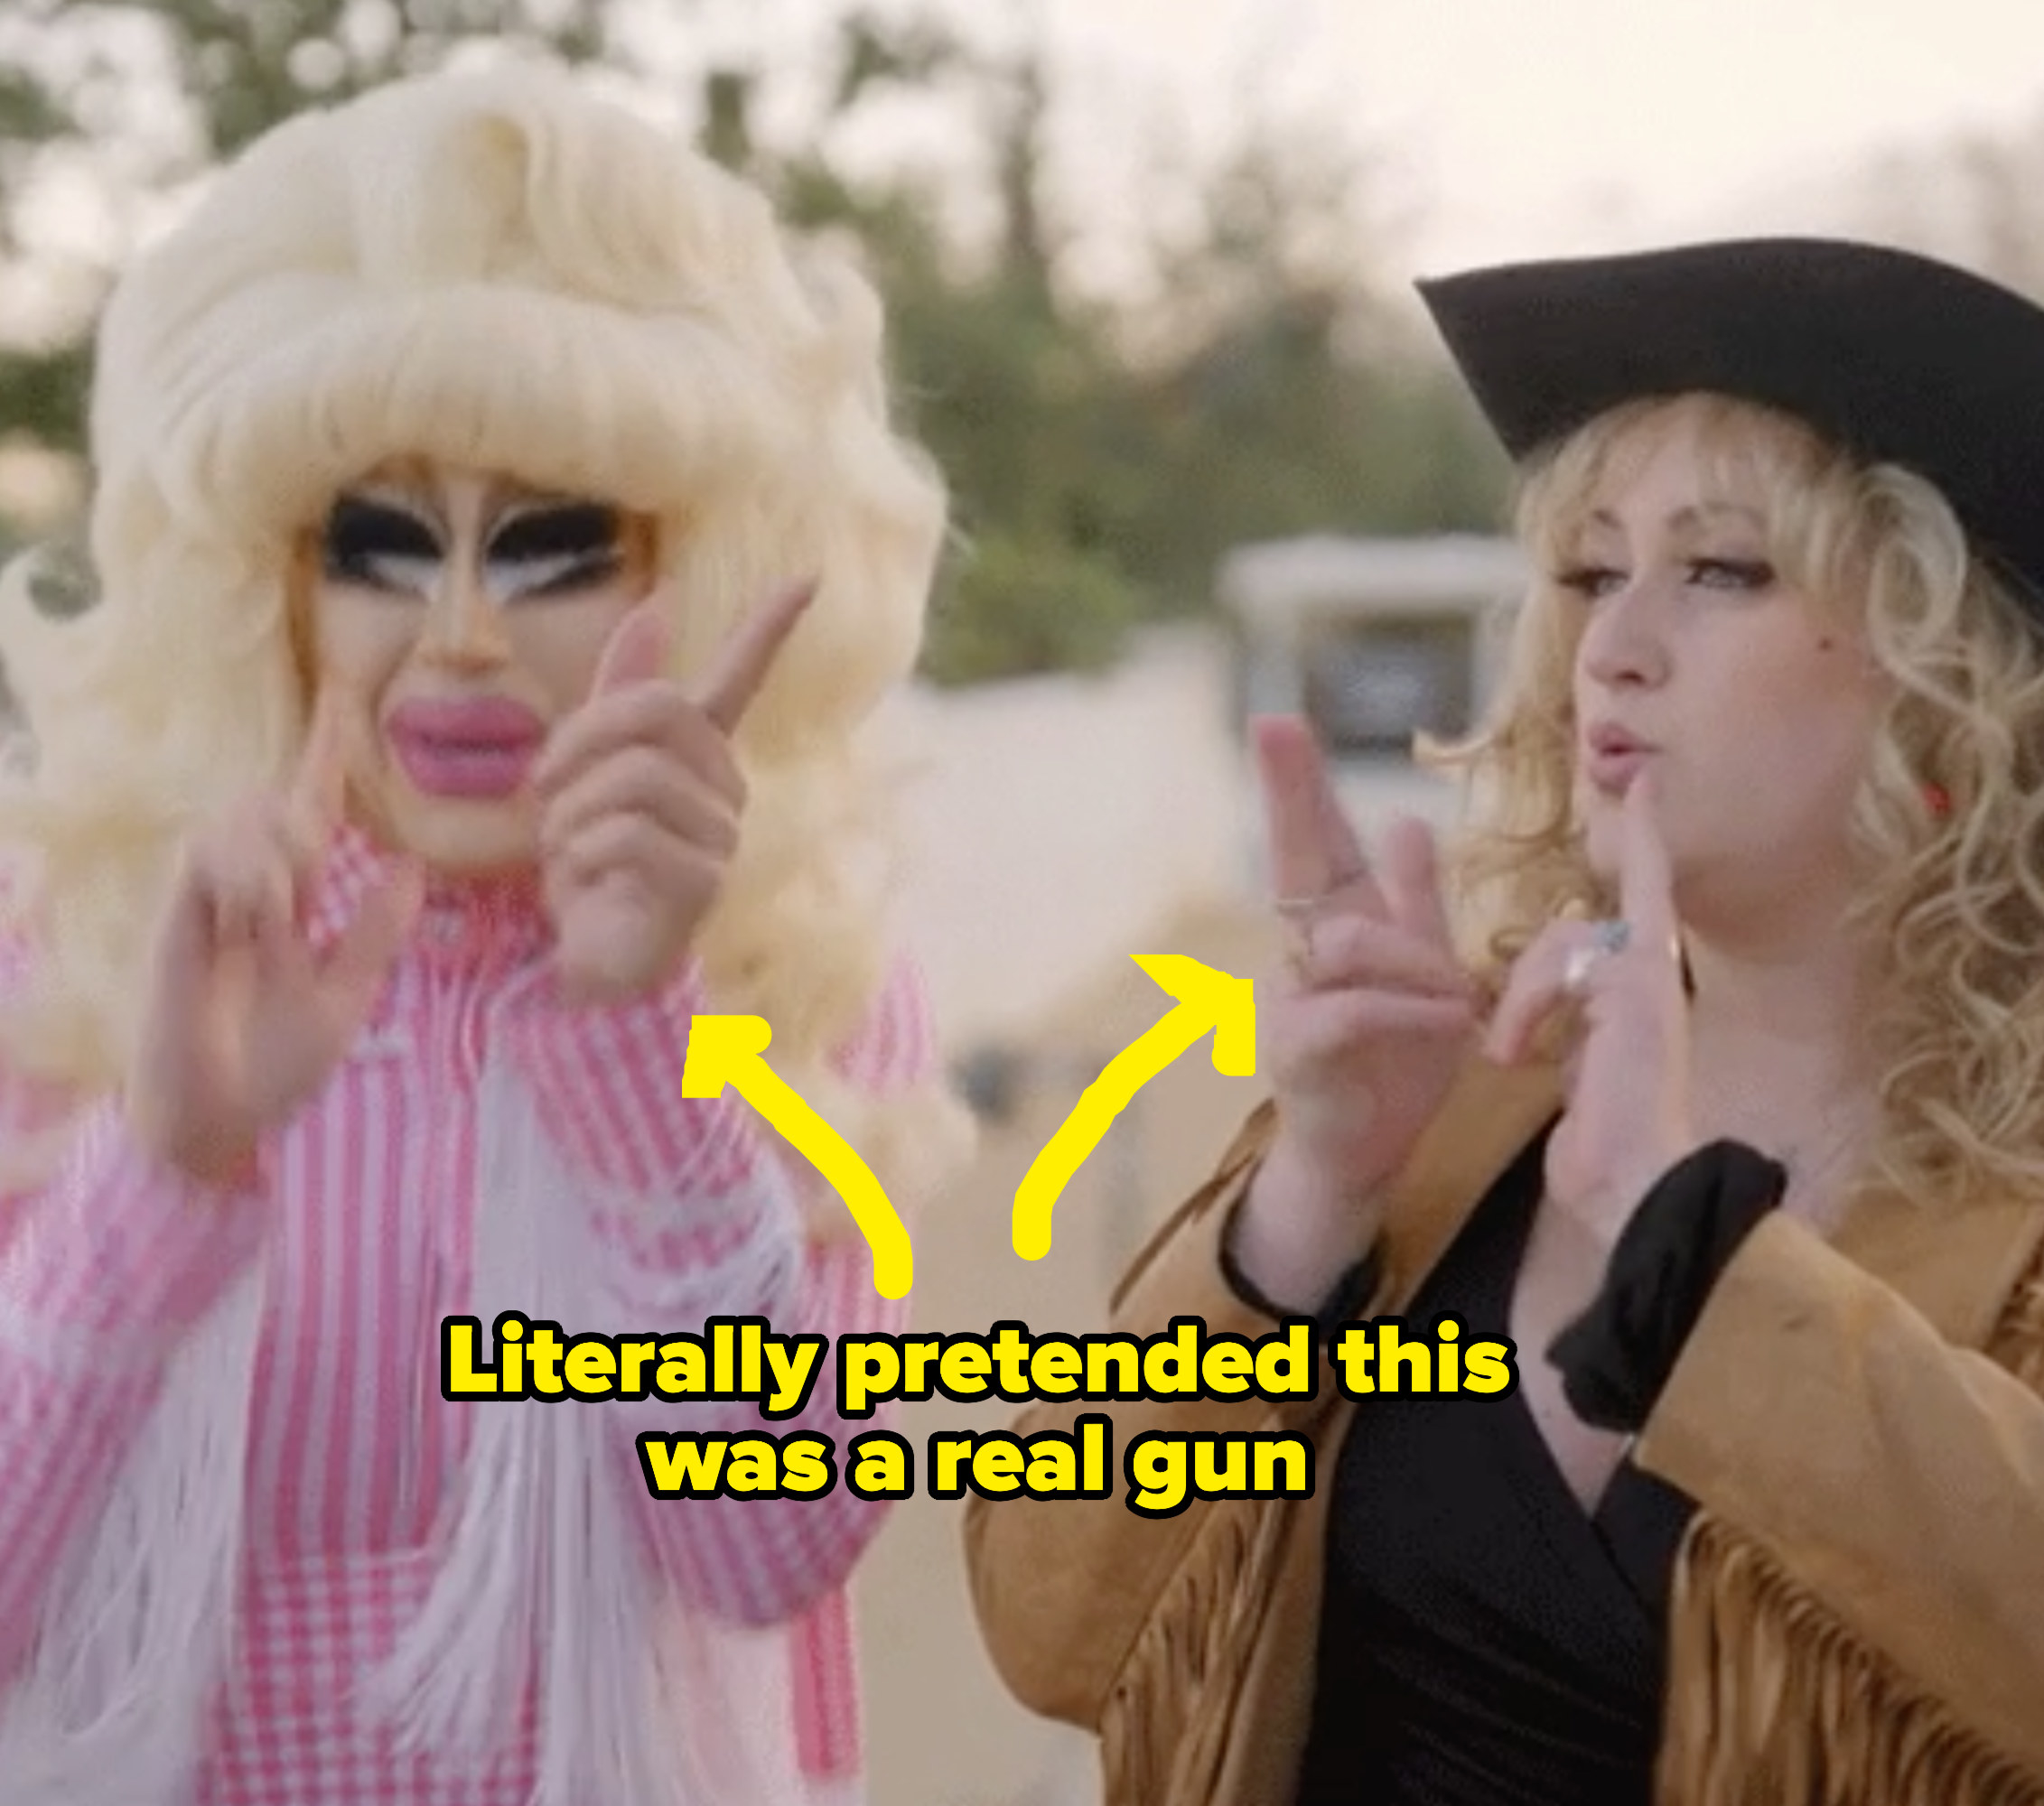 A drag queen and woman with finger guns